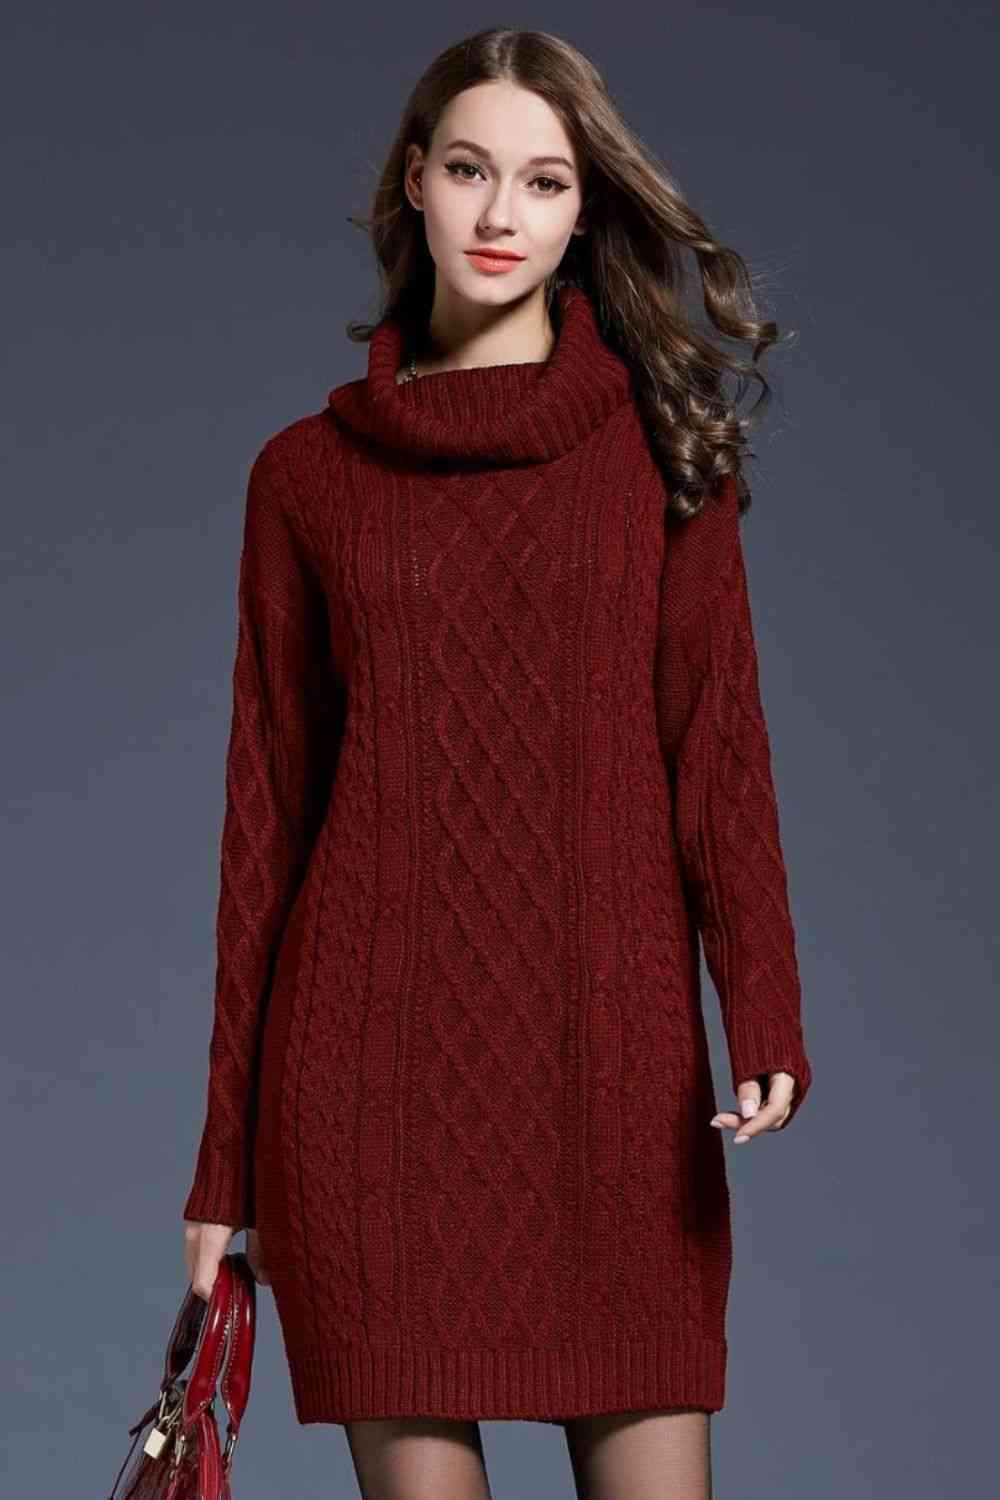 Woven Right Full Size Mixed Knit Cowl Neck Dropped Shoulder Sweater Dress Wine